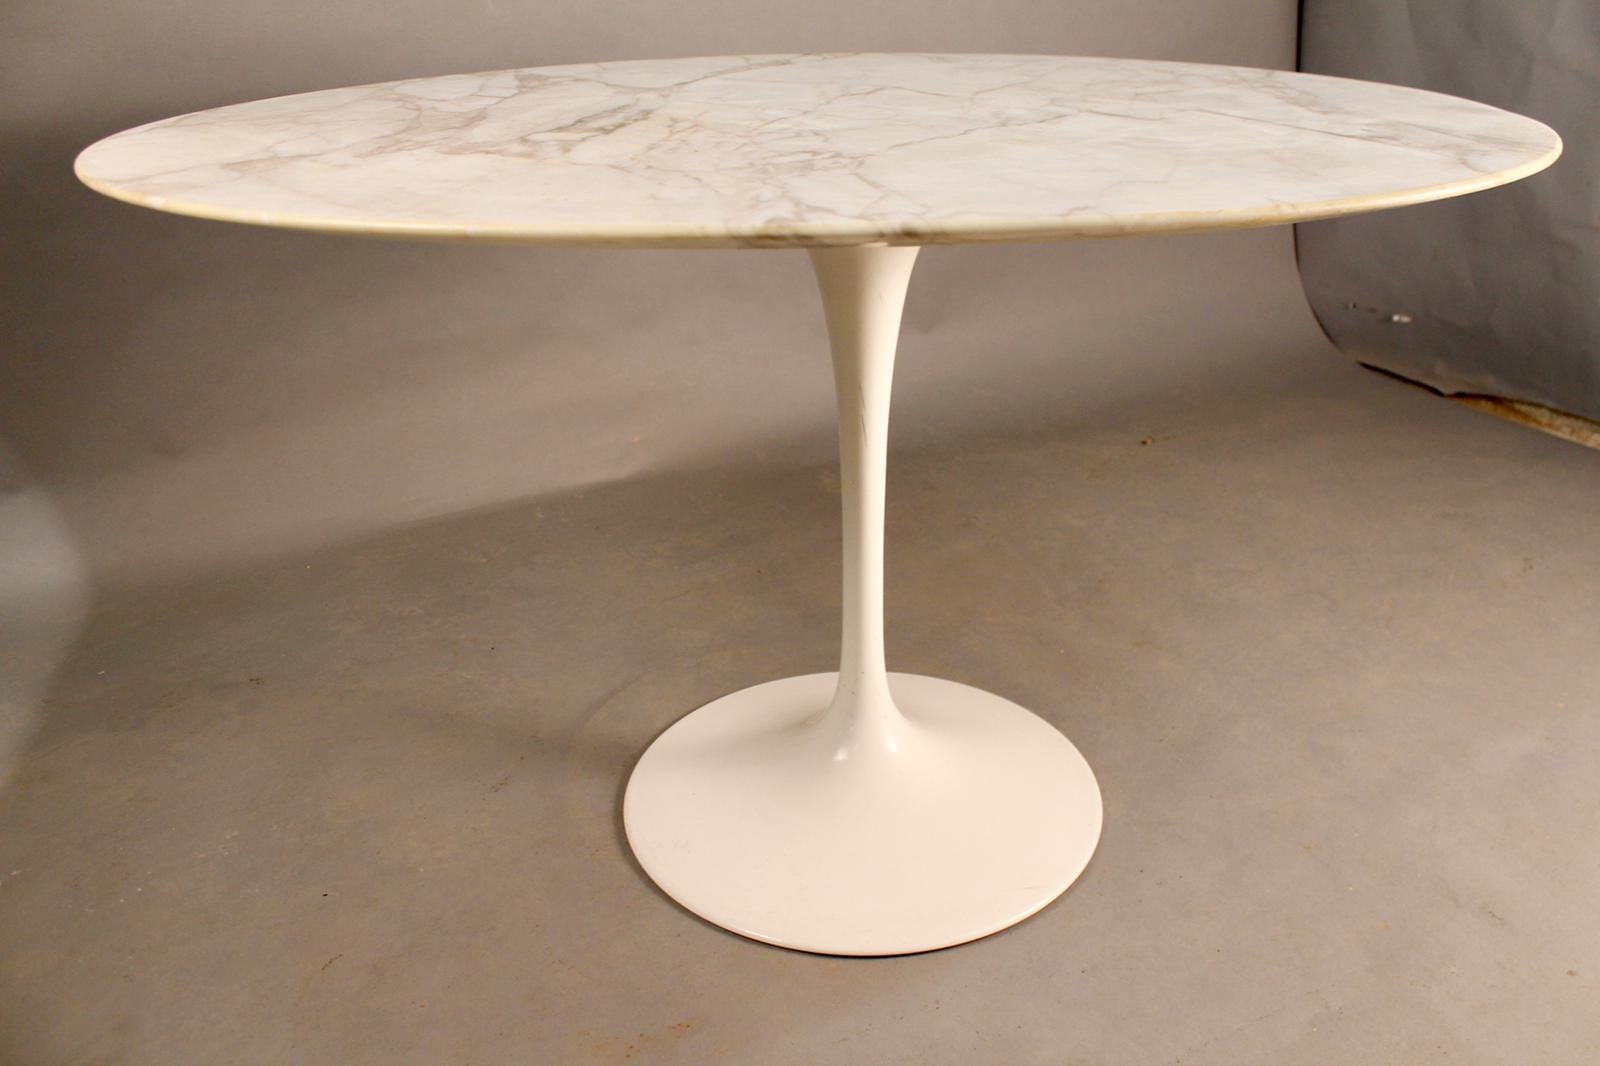 Eero Saarinen (1910-1961) & Knoll International
Tulip, modèle created, 1956.

Round table, Rilsan sheathed cast aluminum base
Calacatta ora marble

It was designed primarily as a chair to match the complementary dining table. The chair has the